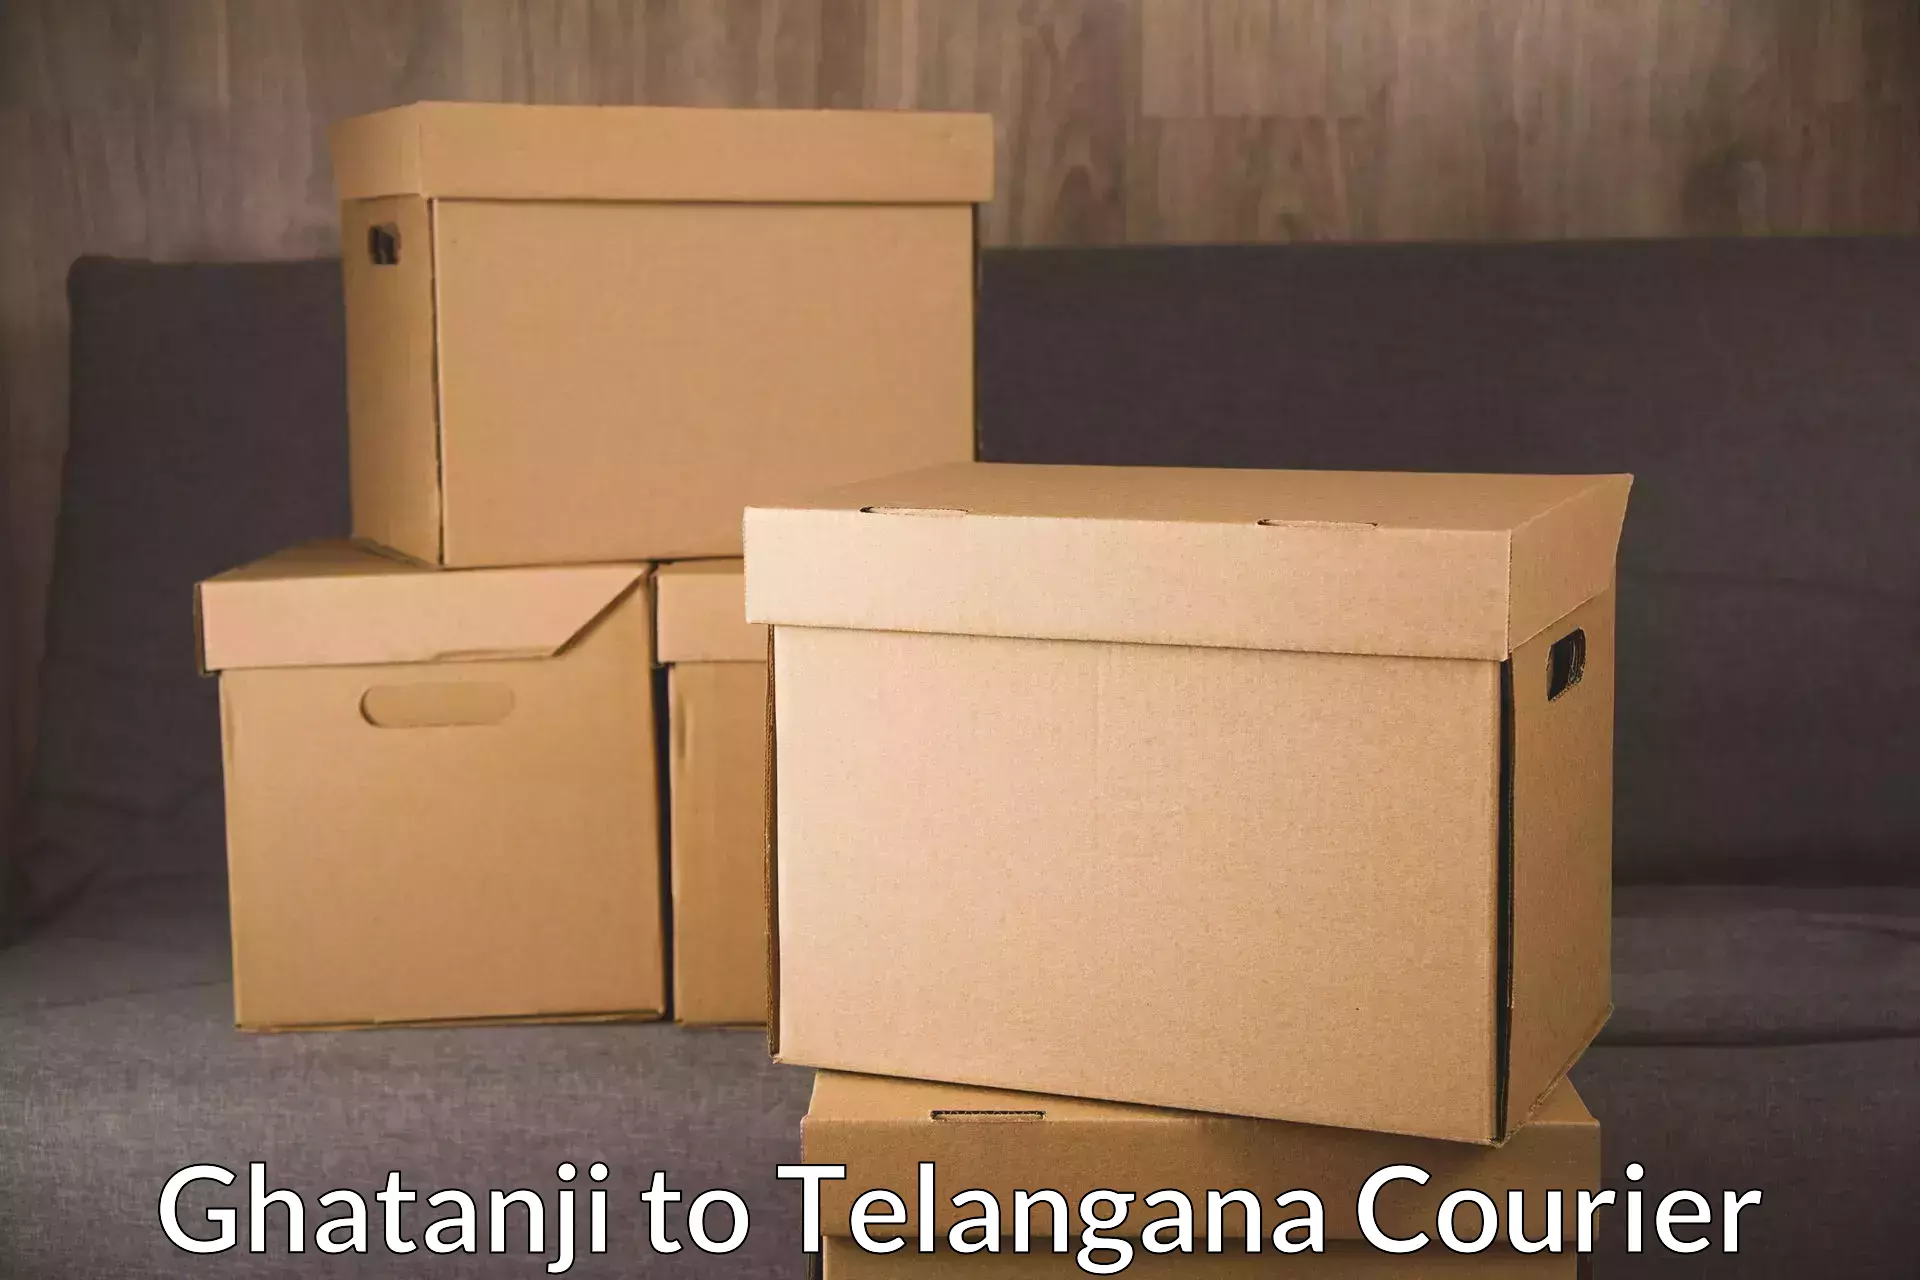 State-of-the-art courier technology Ghatanji to Bejjanki